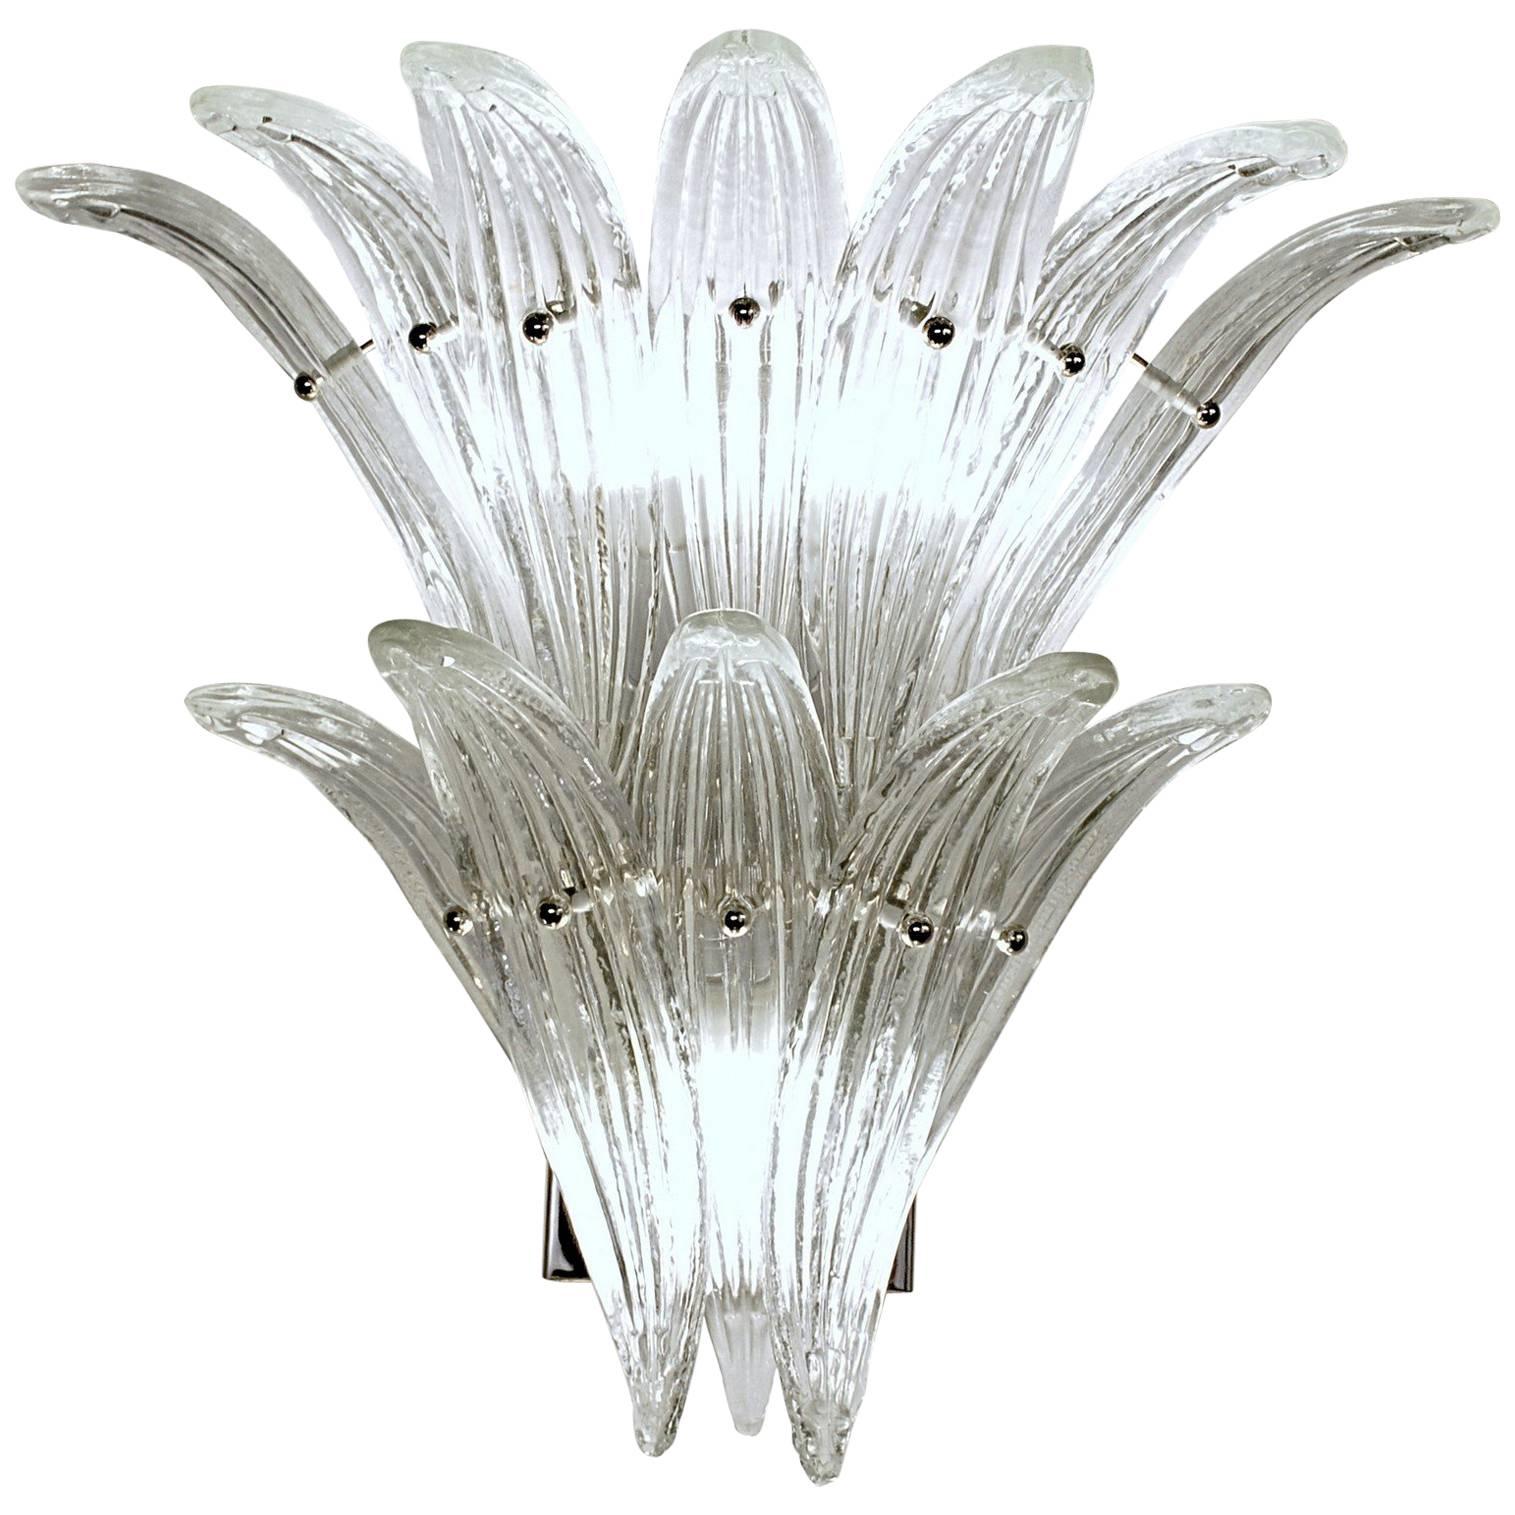 Four Palmette Sconces, 12 Leaves Each, Murano, Barovier Toso Style, circa 1990s